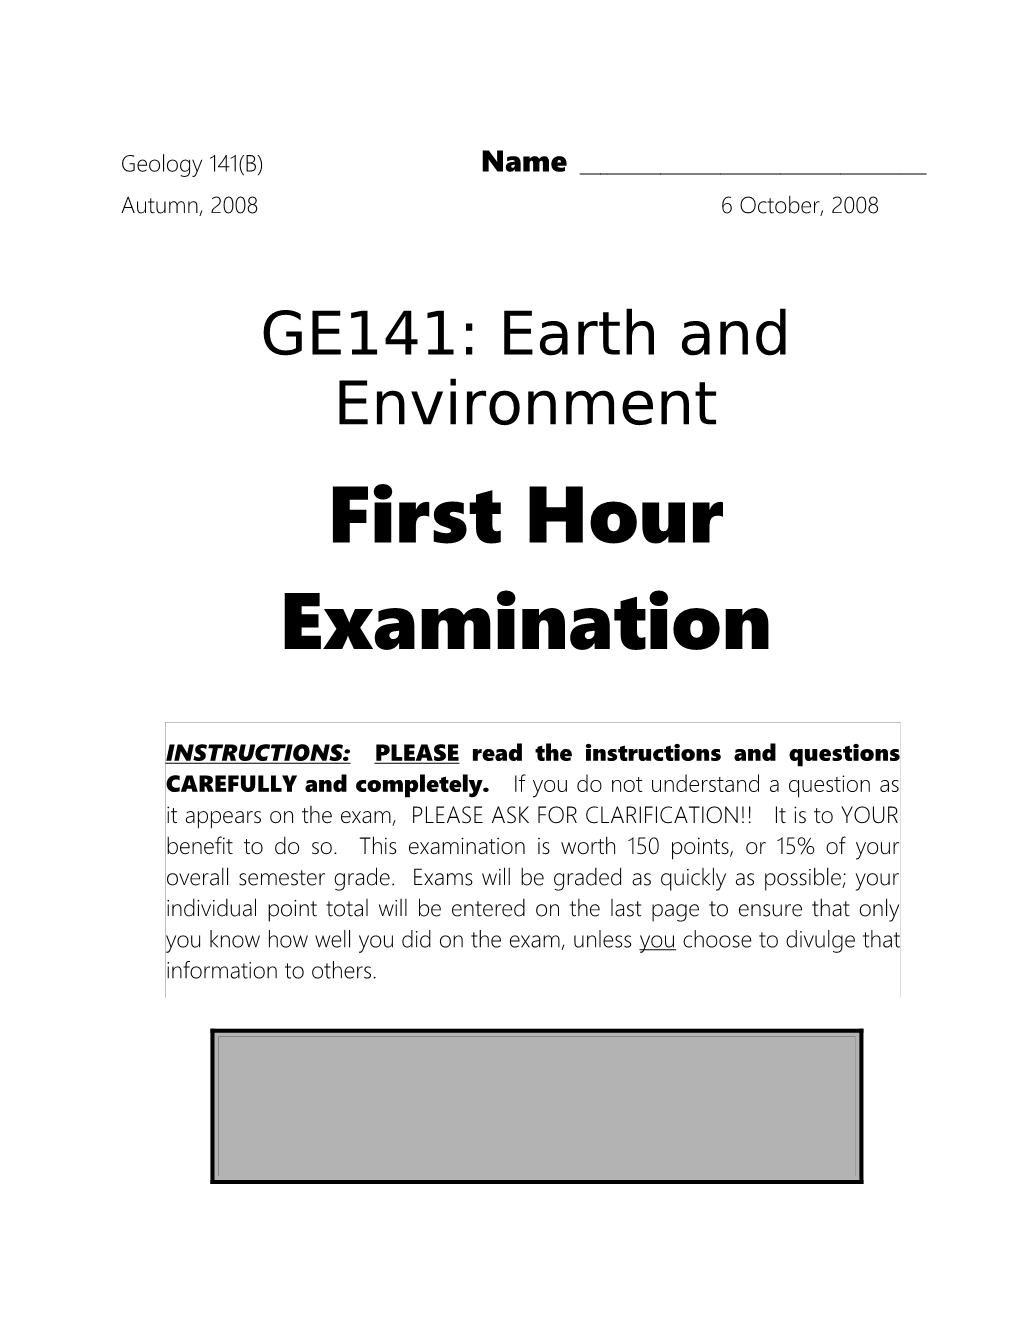 Geology 141(B): Fall, 2008First Hour Examination Page 1